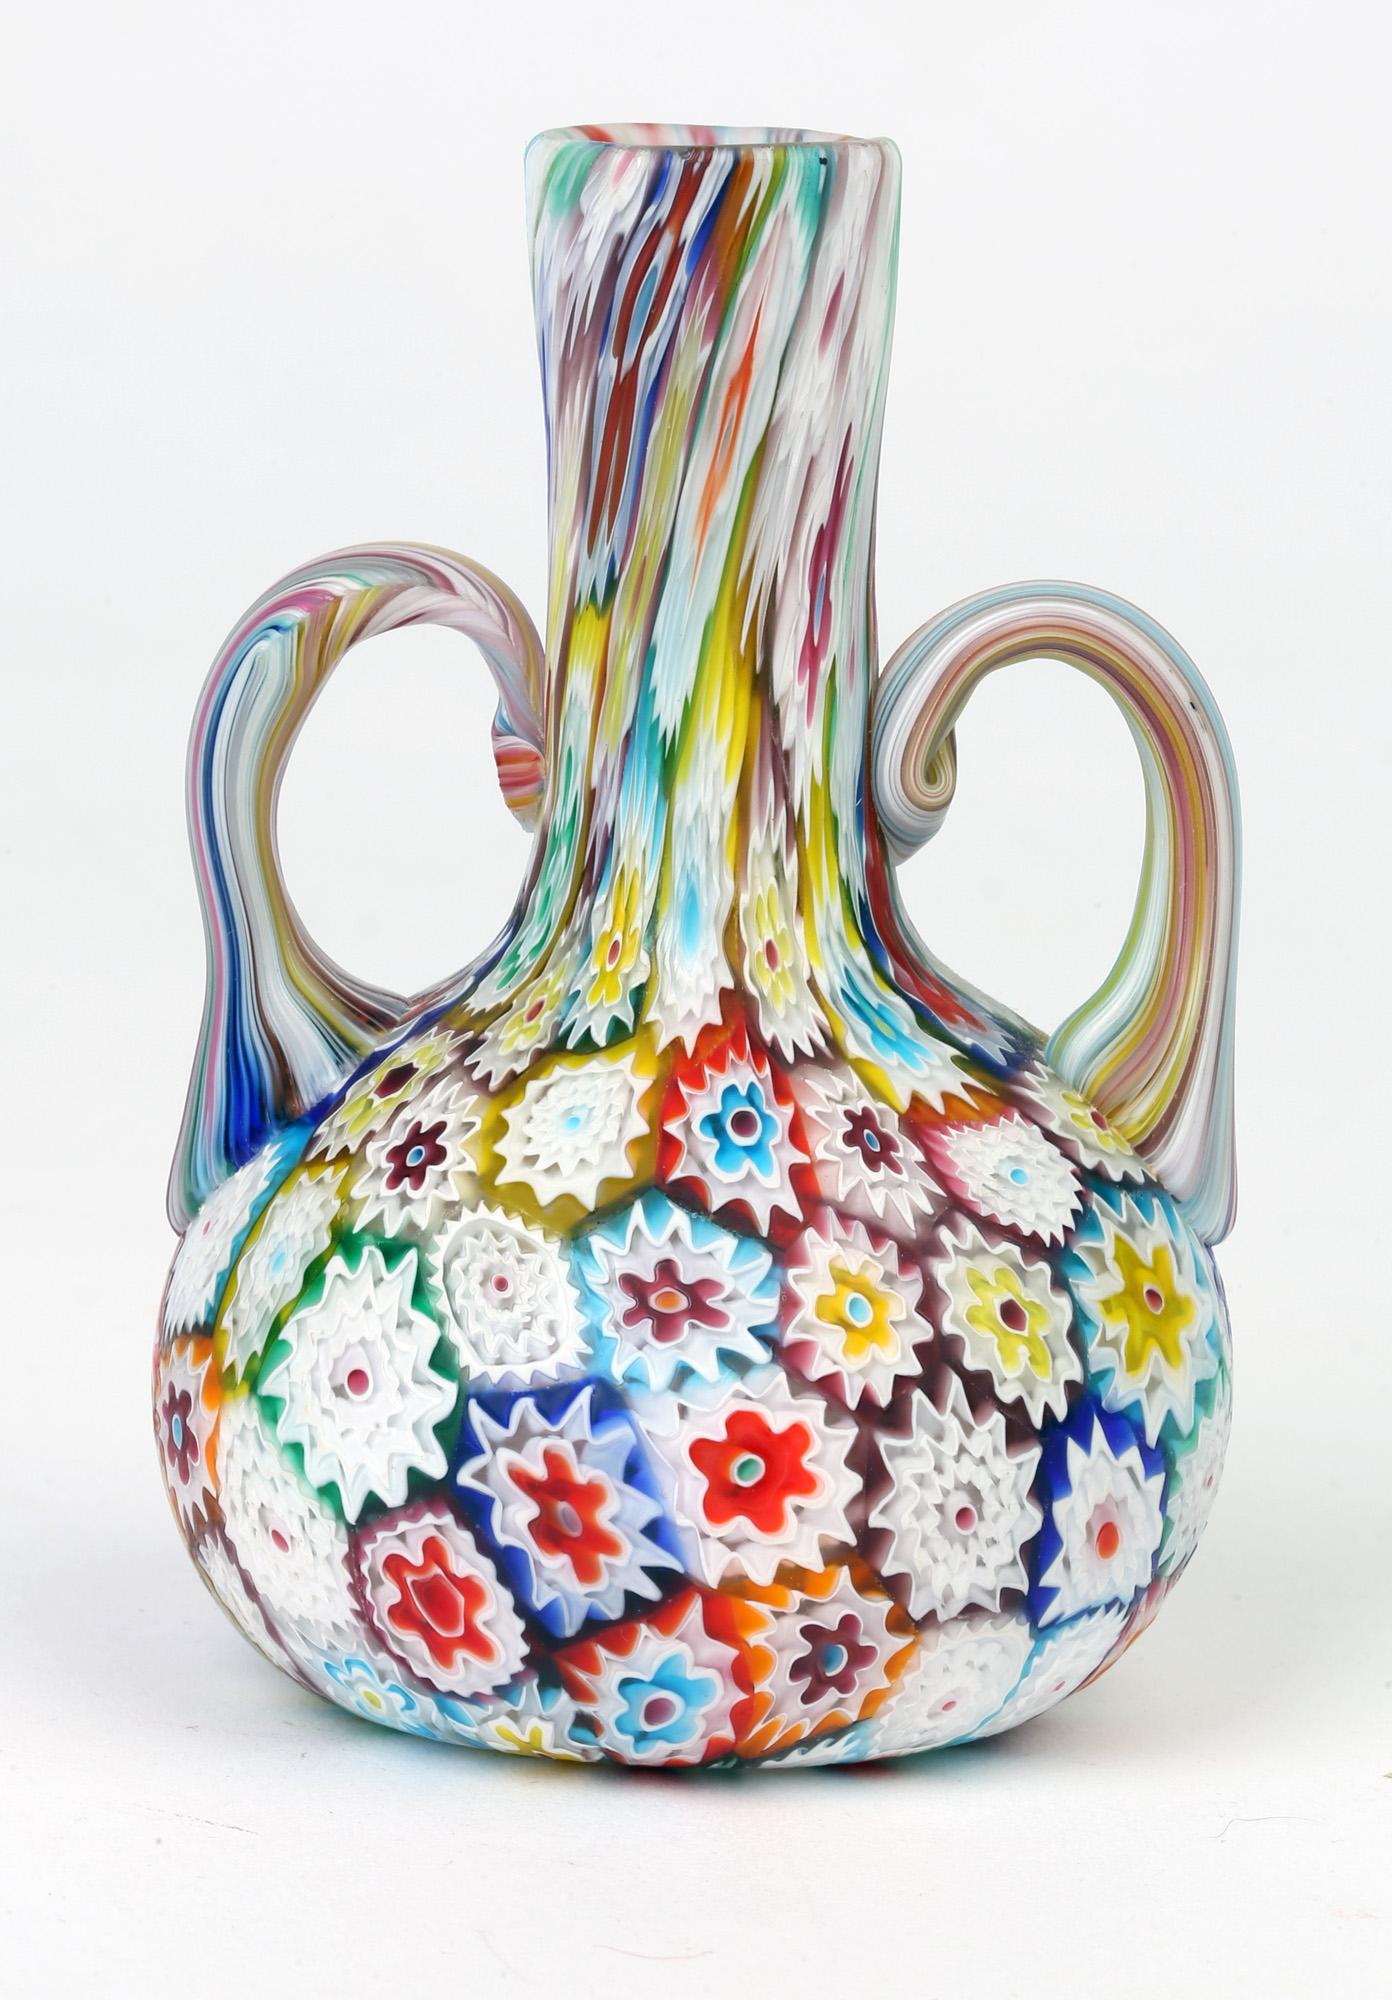 A very fine Art Deco Italian Murano satin glass millefiori twin handled vase dating from circa 1930-1940. This quality vase is of small bottle shape with a rounded bulbous body and tall slender neck with loop handles applied to either side of the